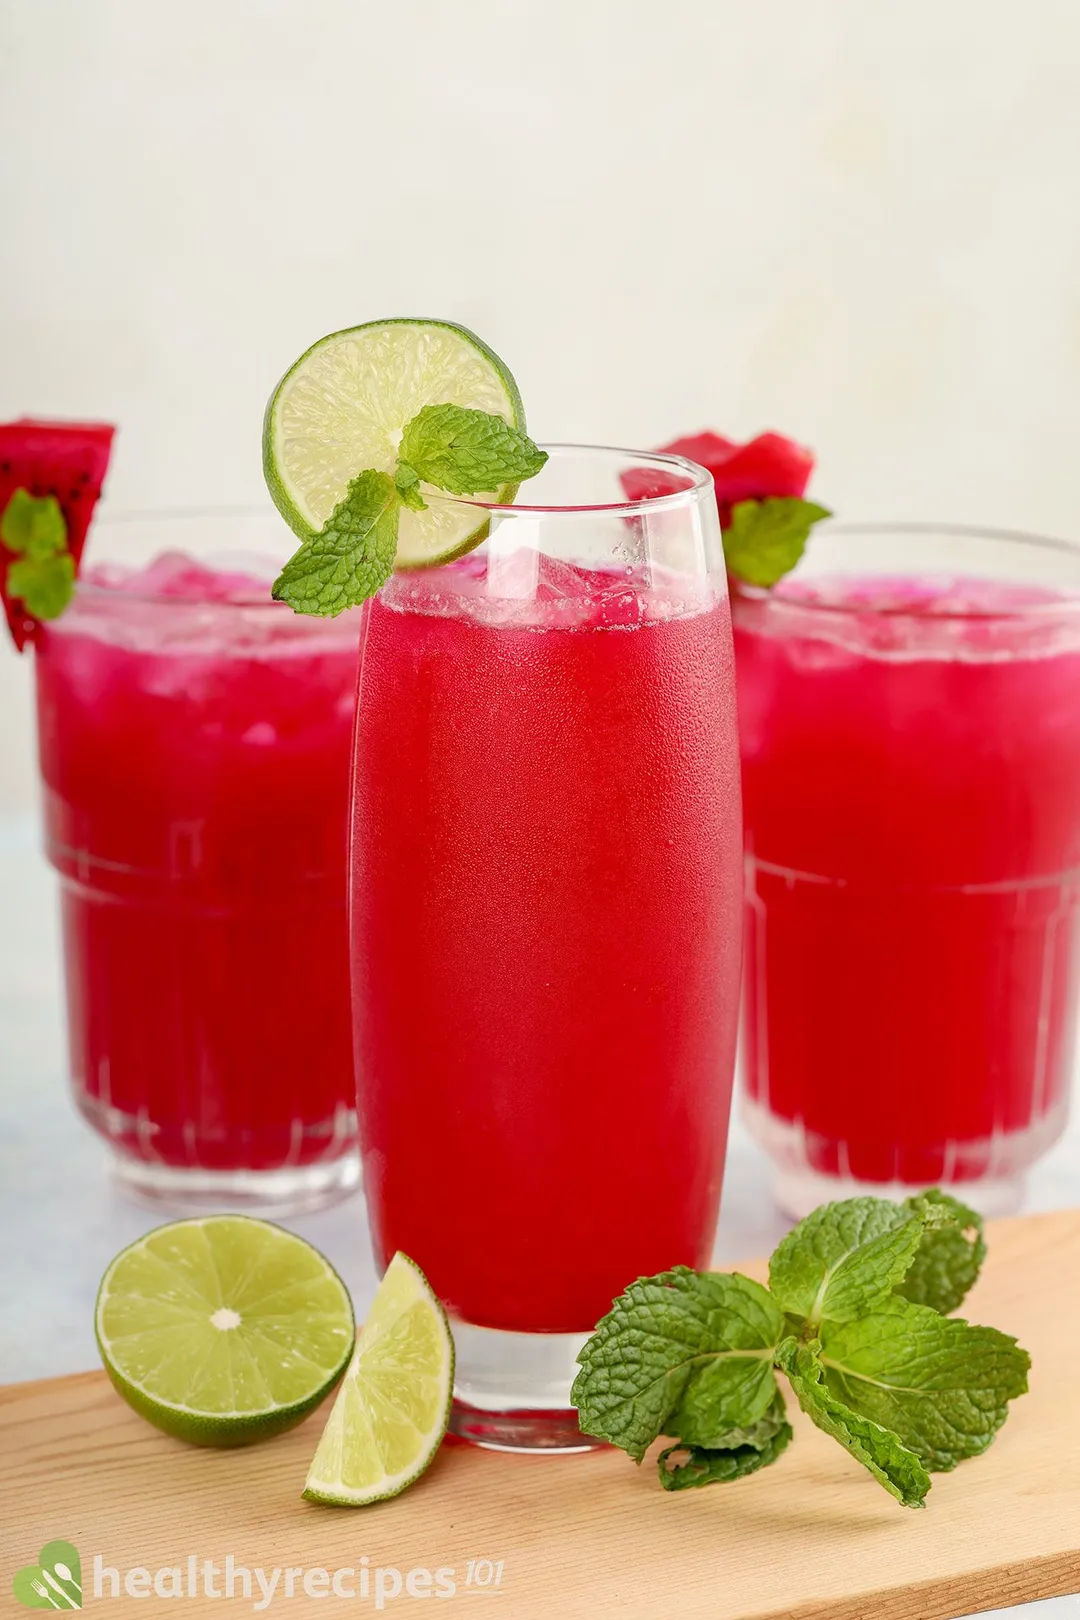 Three glasses of dragon fruit juice placed on a wooden board with lime wedges and mint leaves.